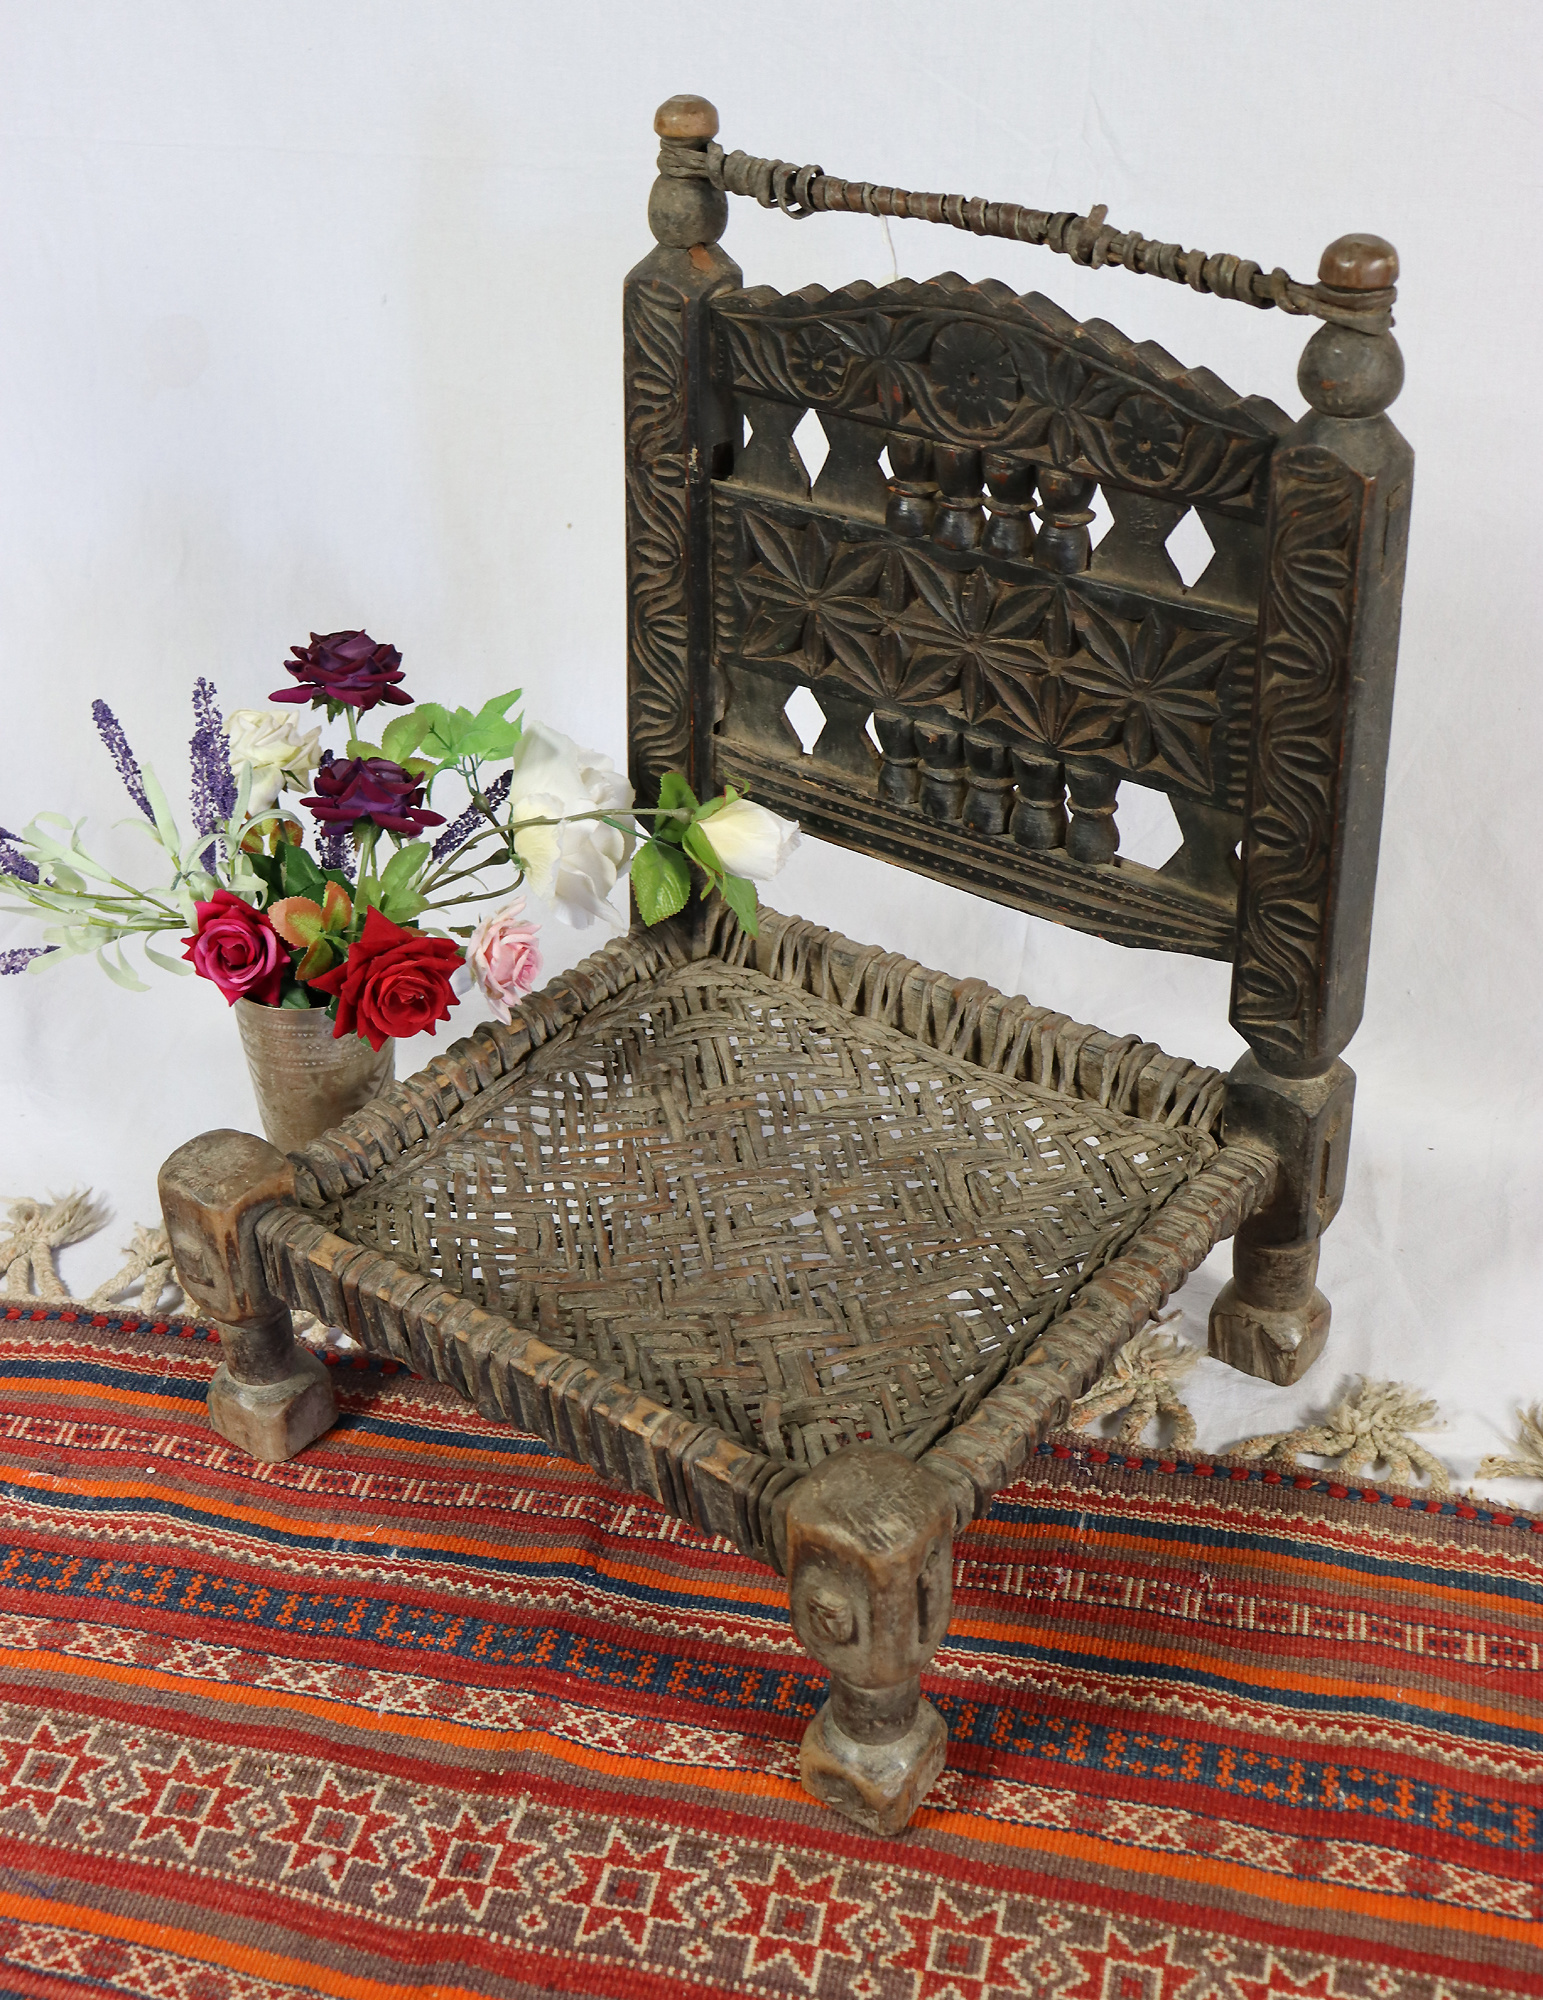 antiquity chair from Nuristan Afghanistan / Swat-valley Pakistan.